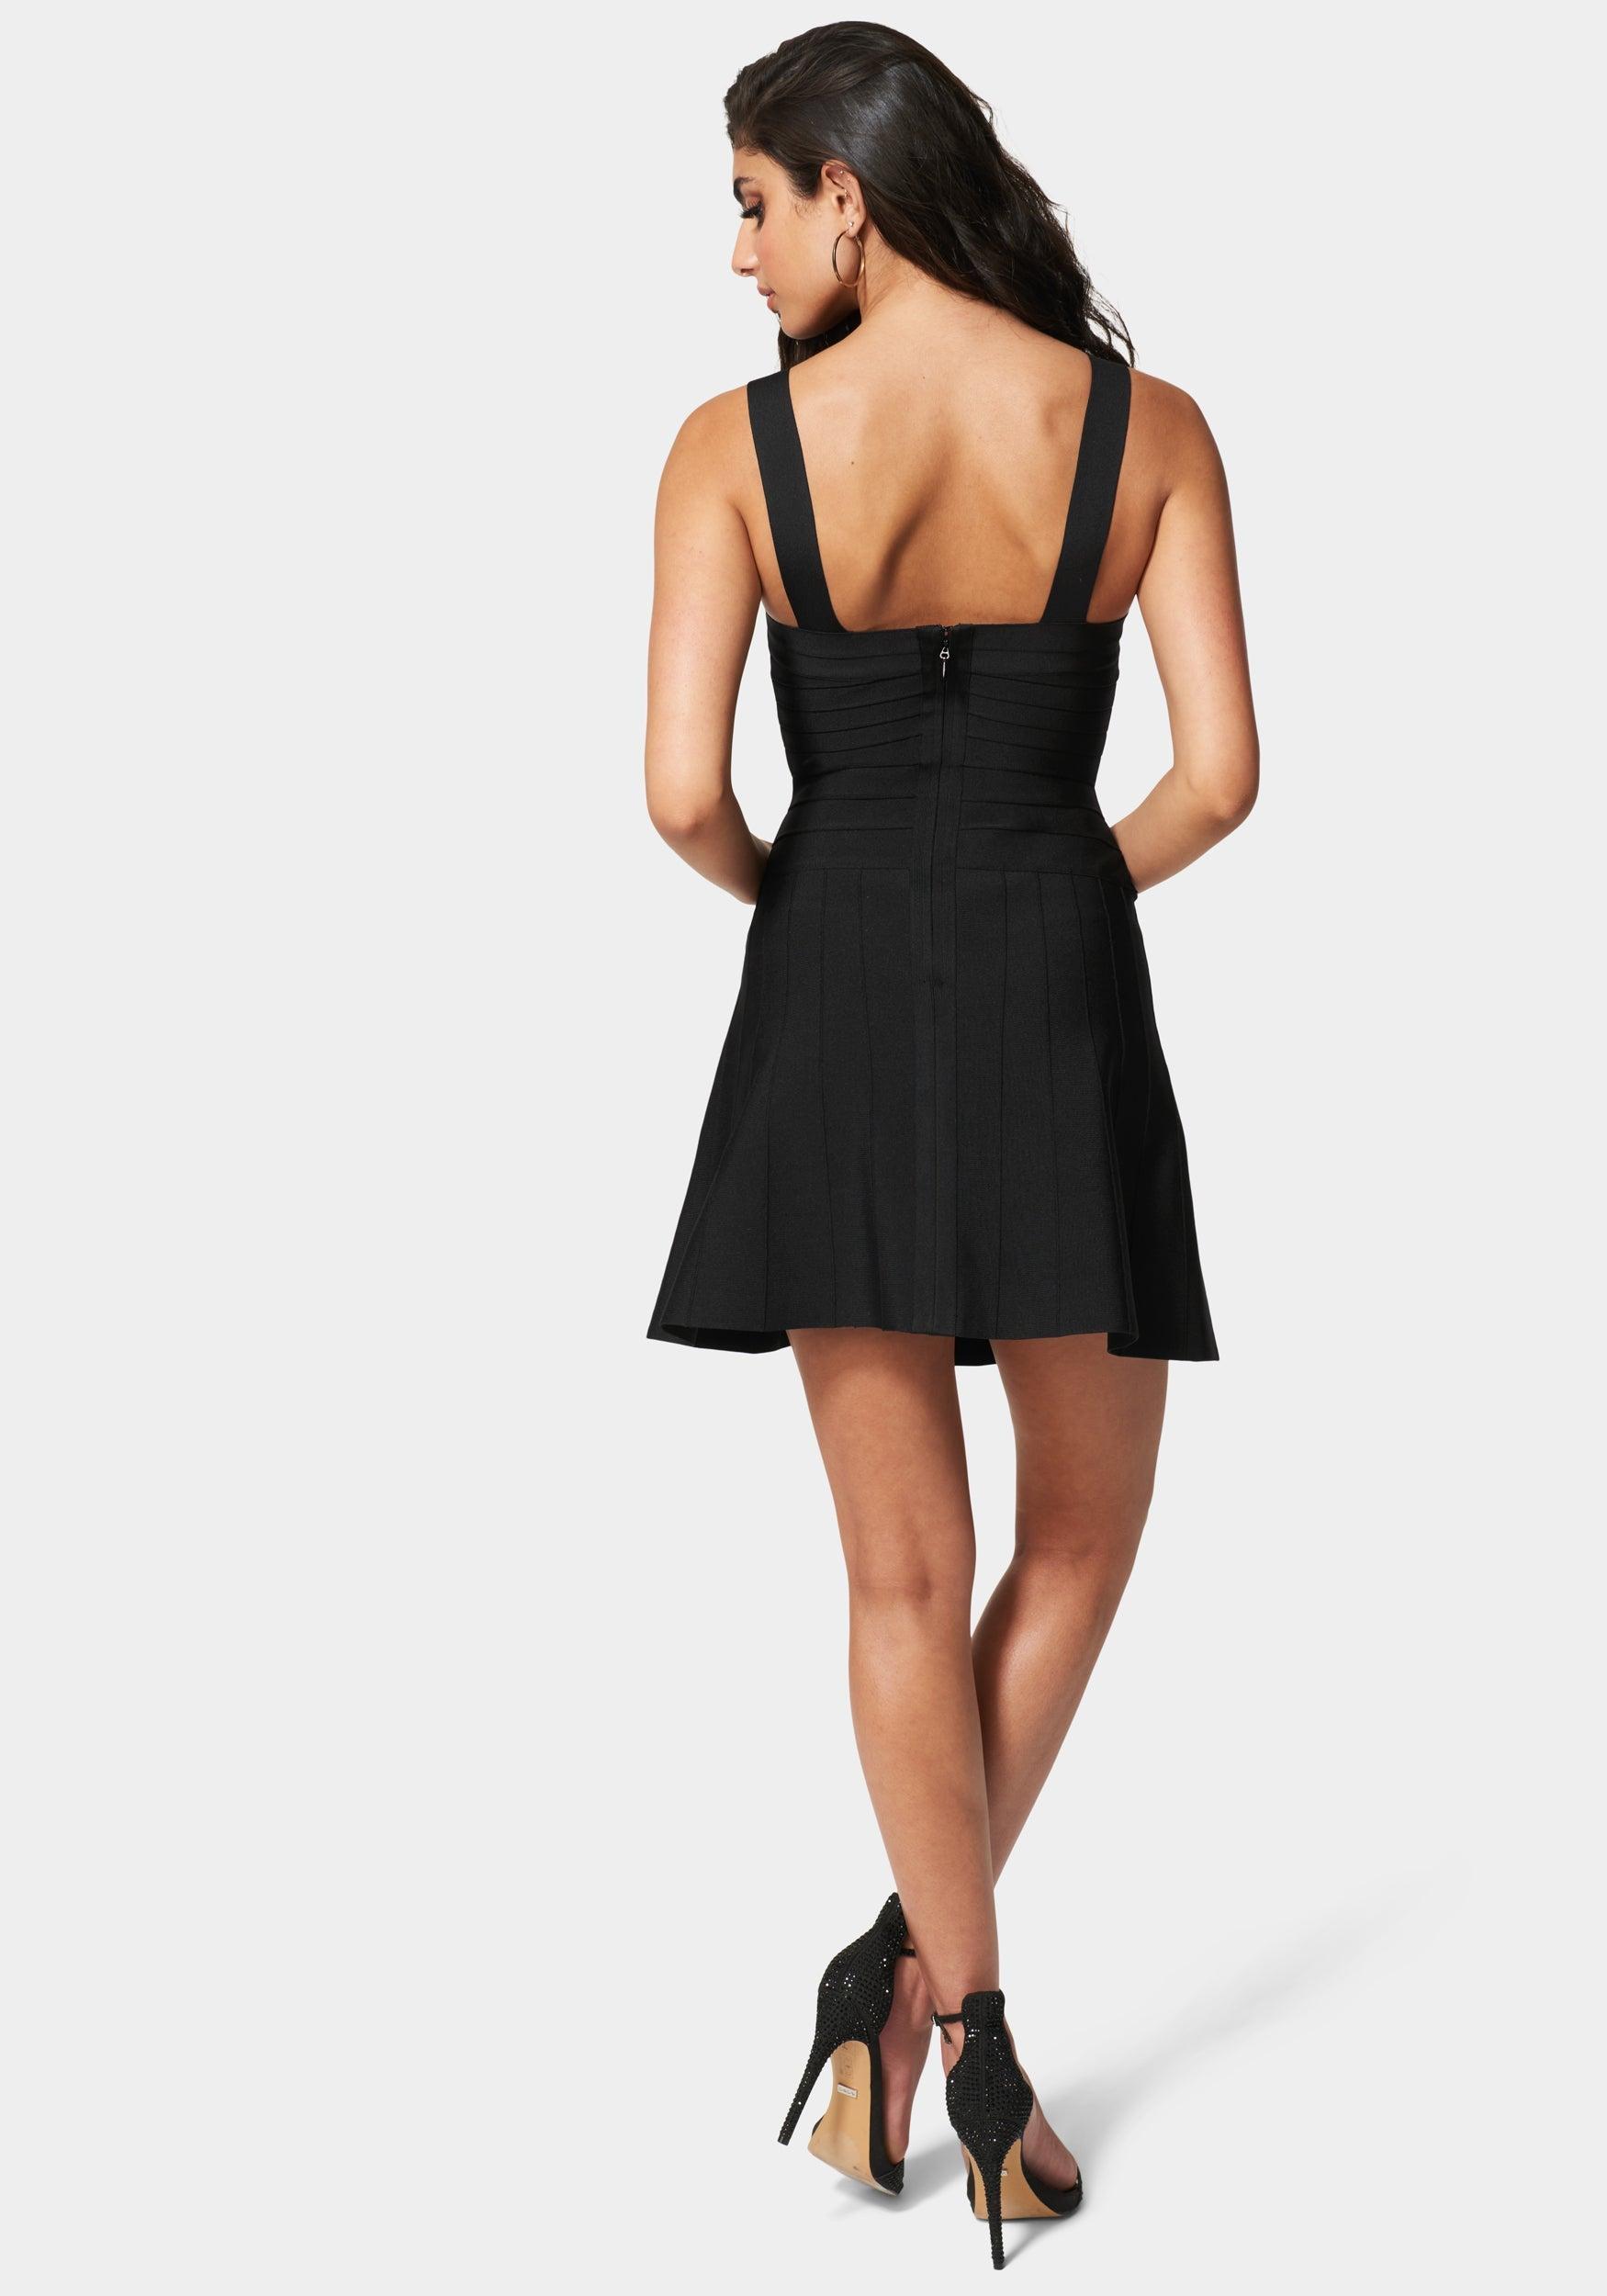 Luxe Bandage Strapless A-Line Dress